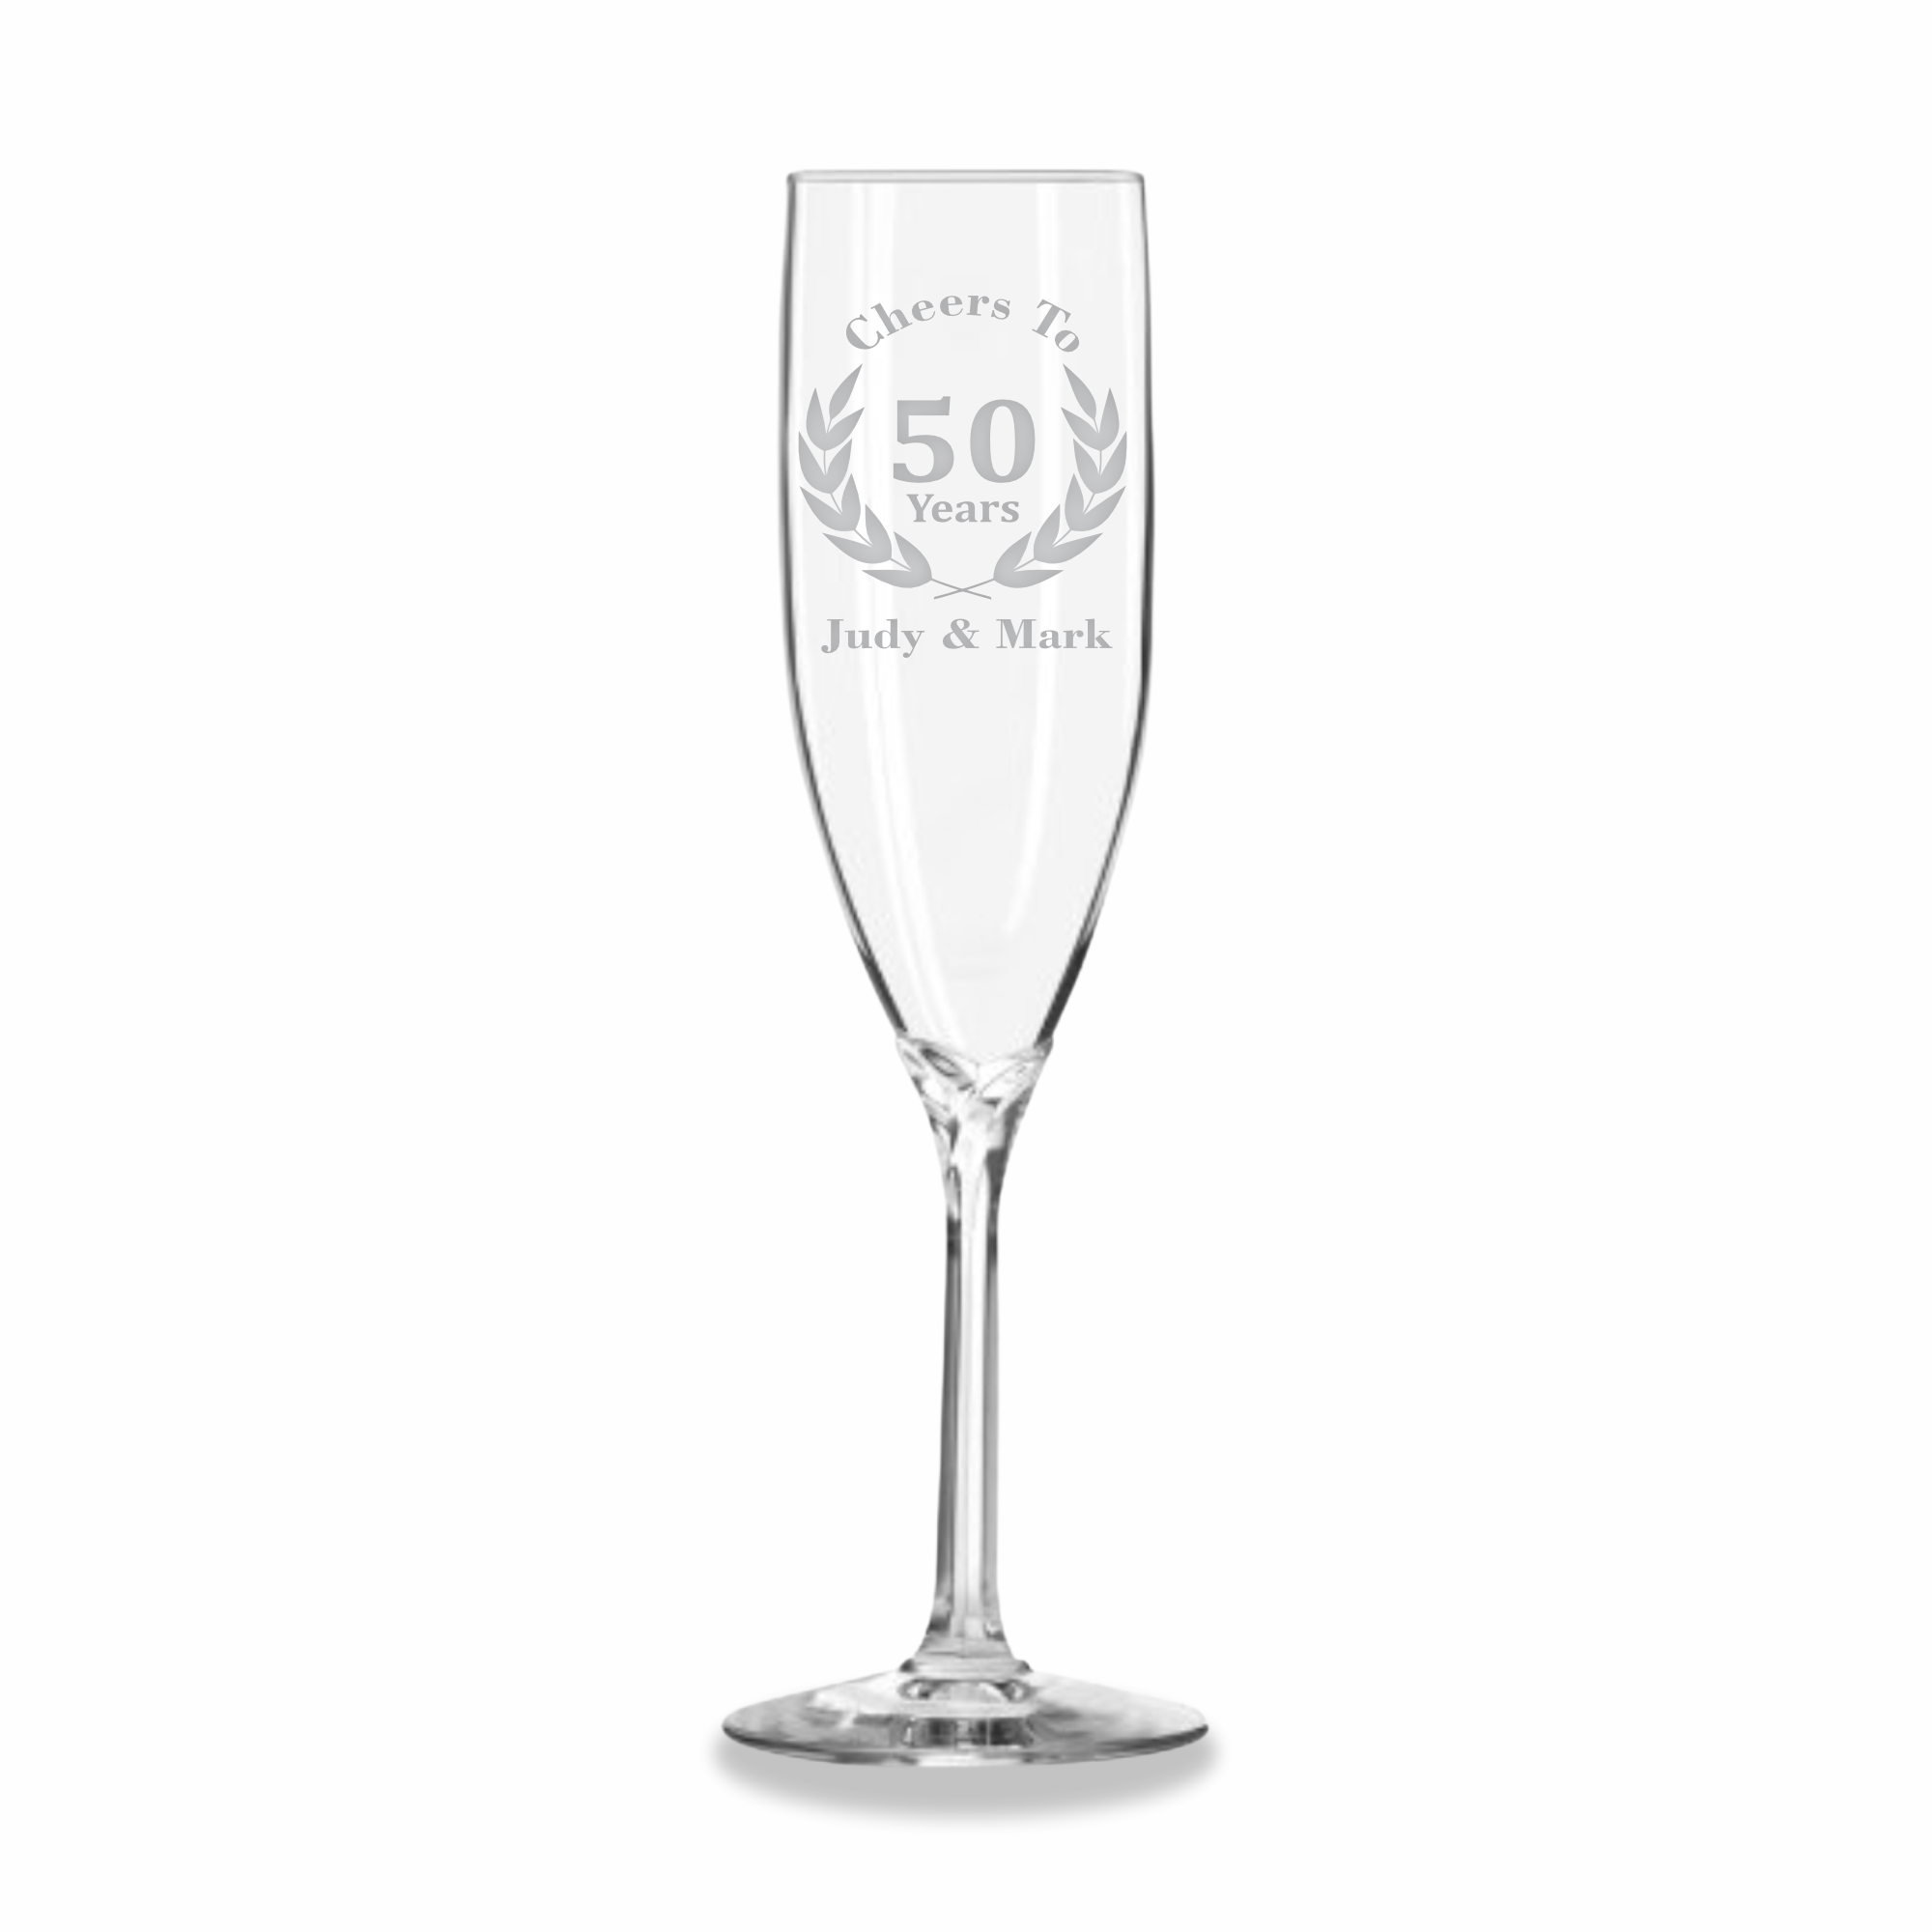 Cheers to Years | Personalized 6oz Champagne Flute